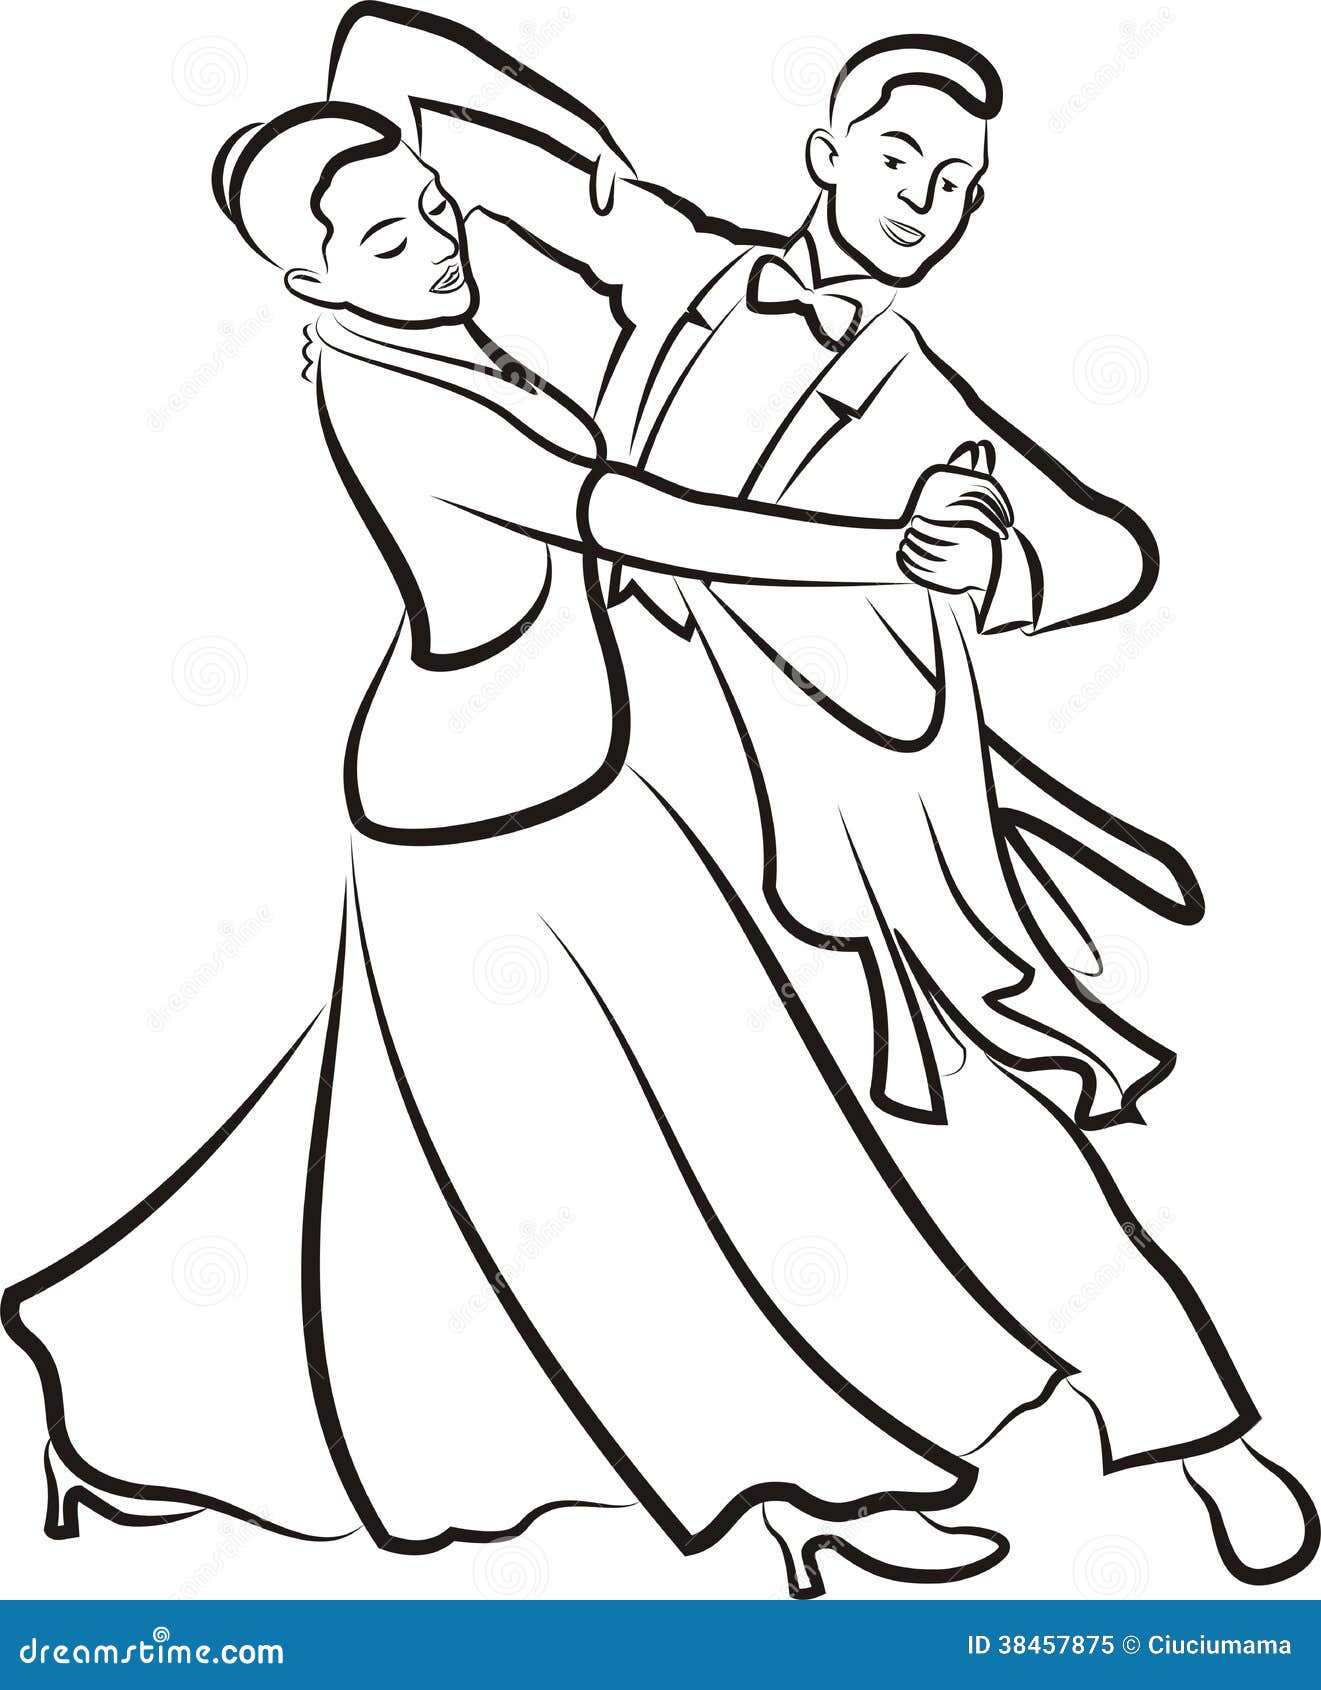 free dance clipart black and white - photo #39